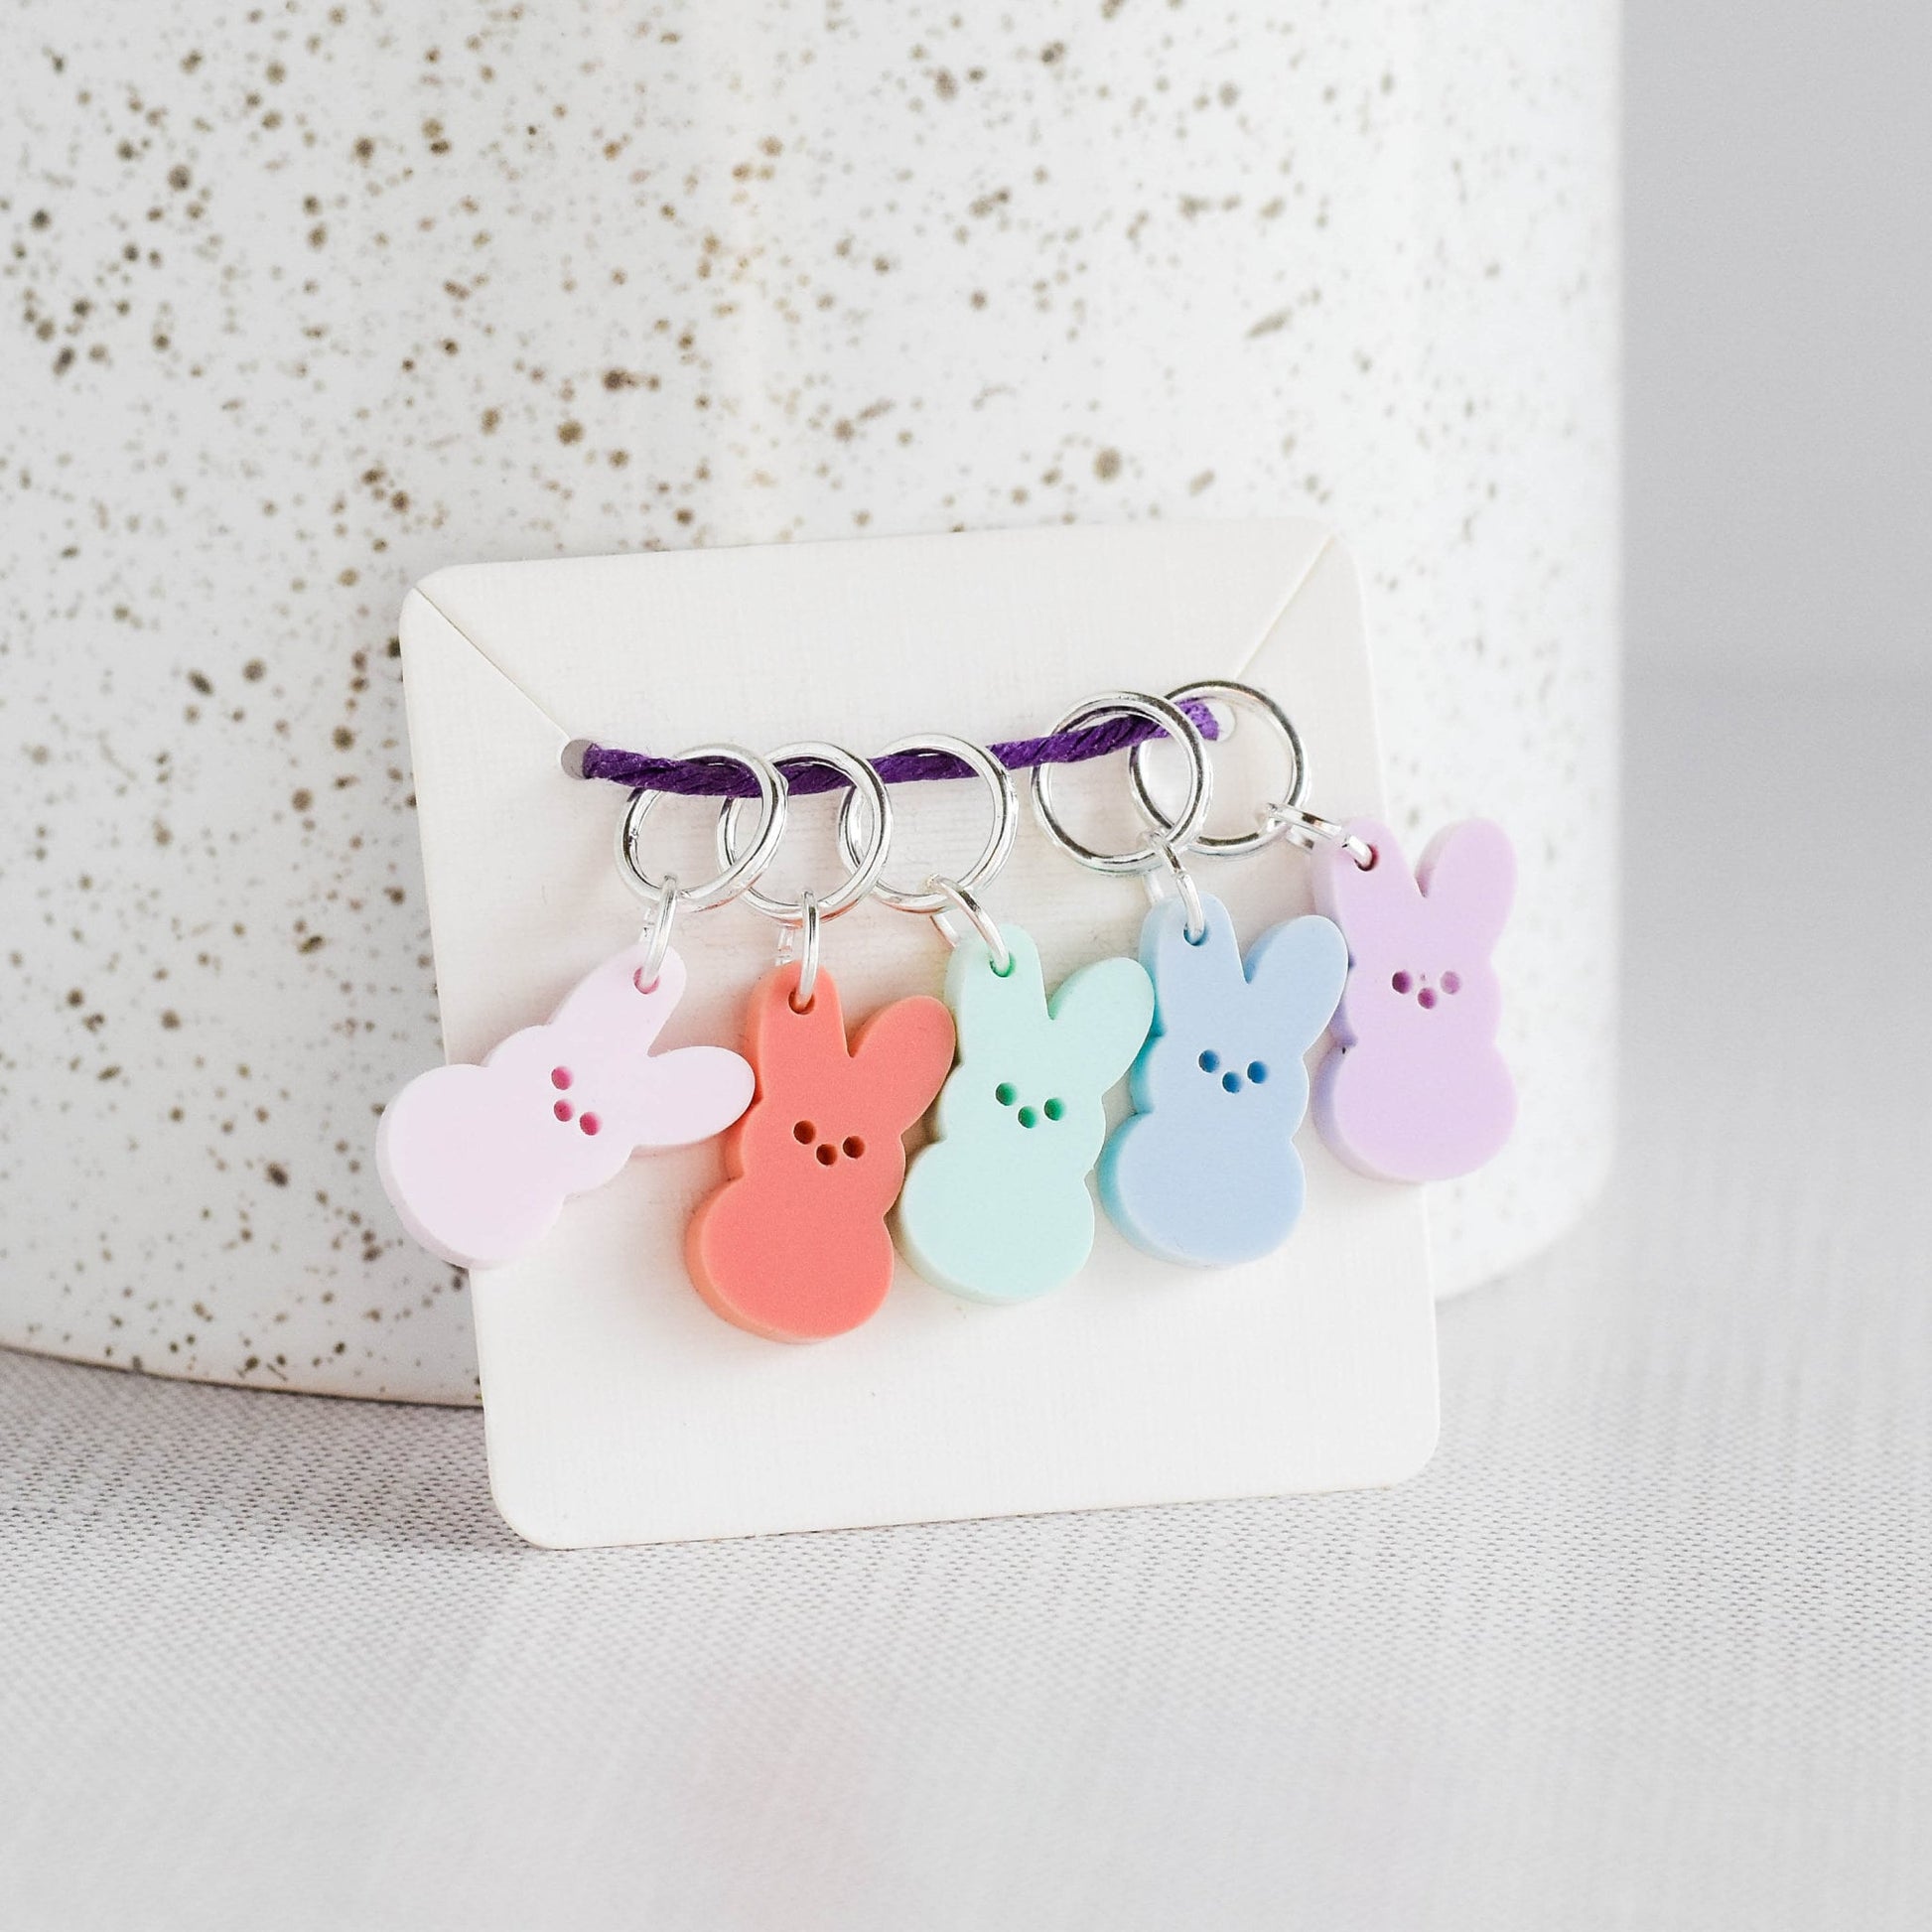 Set of 5 Stitch Markers - Easter Bunnies - Bunny Markers, Laser Engraved Acrylic Stitch Markers, Marshmallow Bunny, Easter Stitch Markers